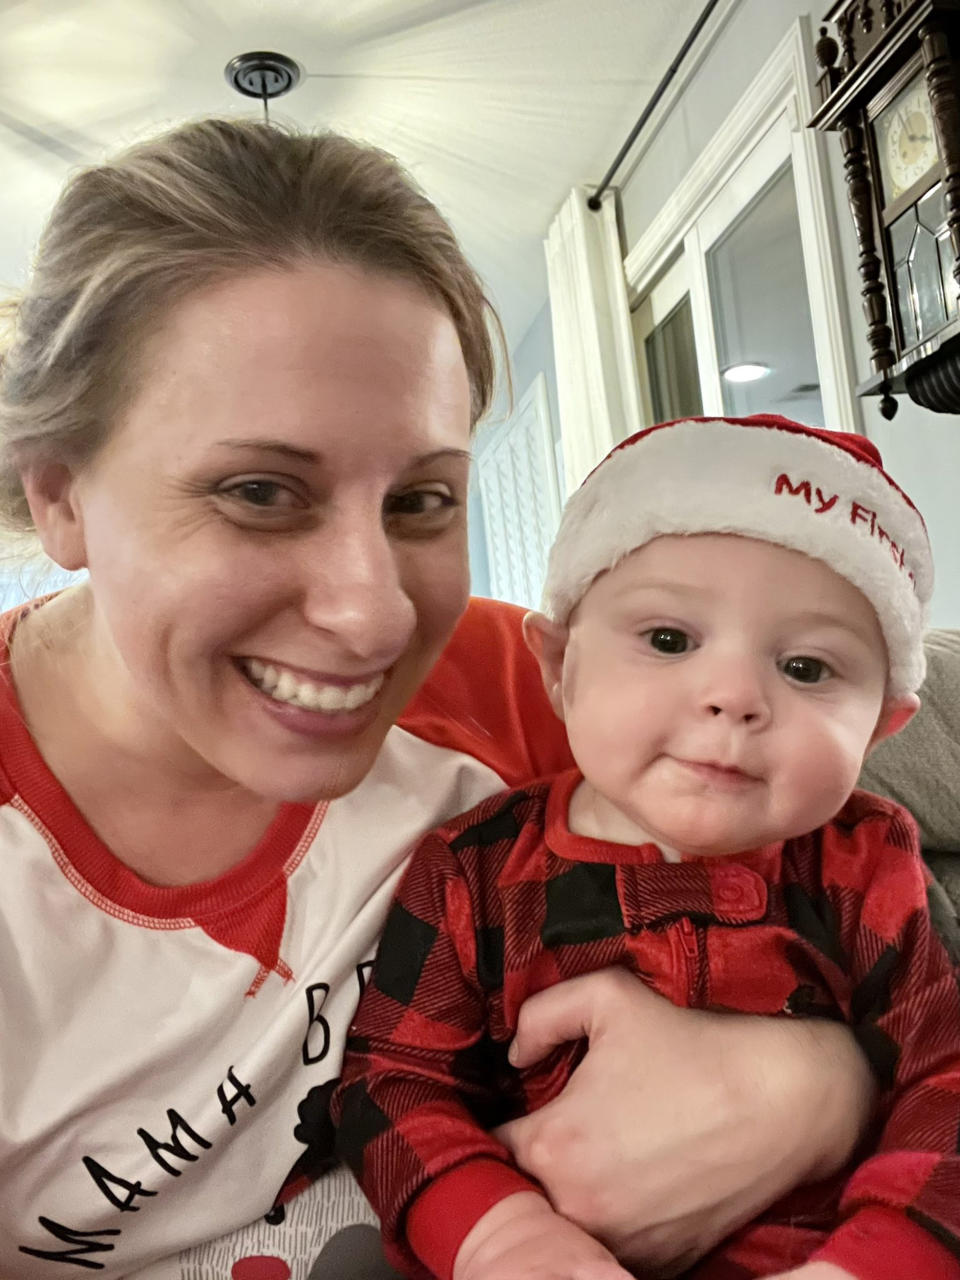 Katie Hill with her son, who just turned 1. She knows someday she'll have to explain to him what 